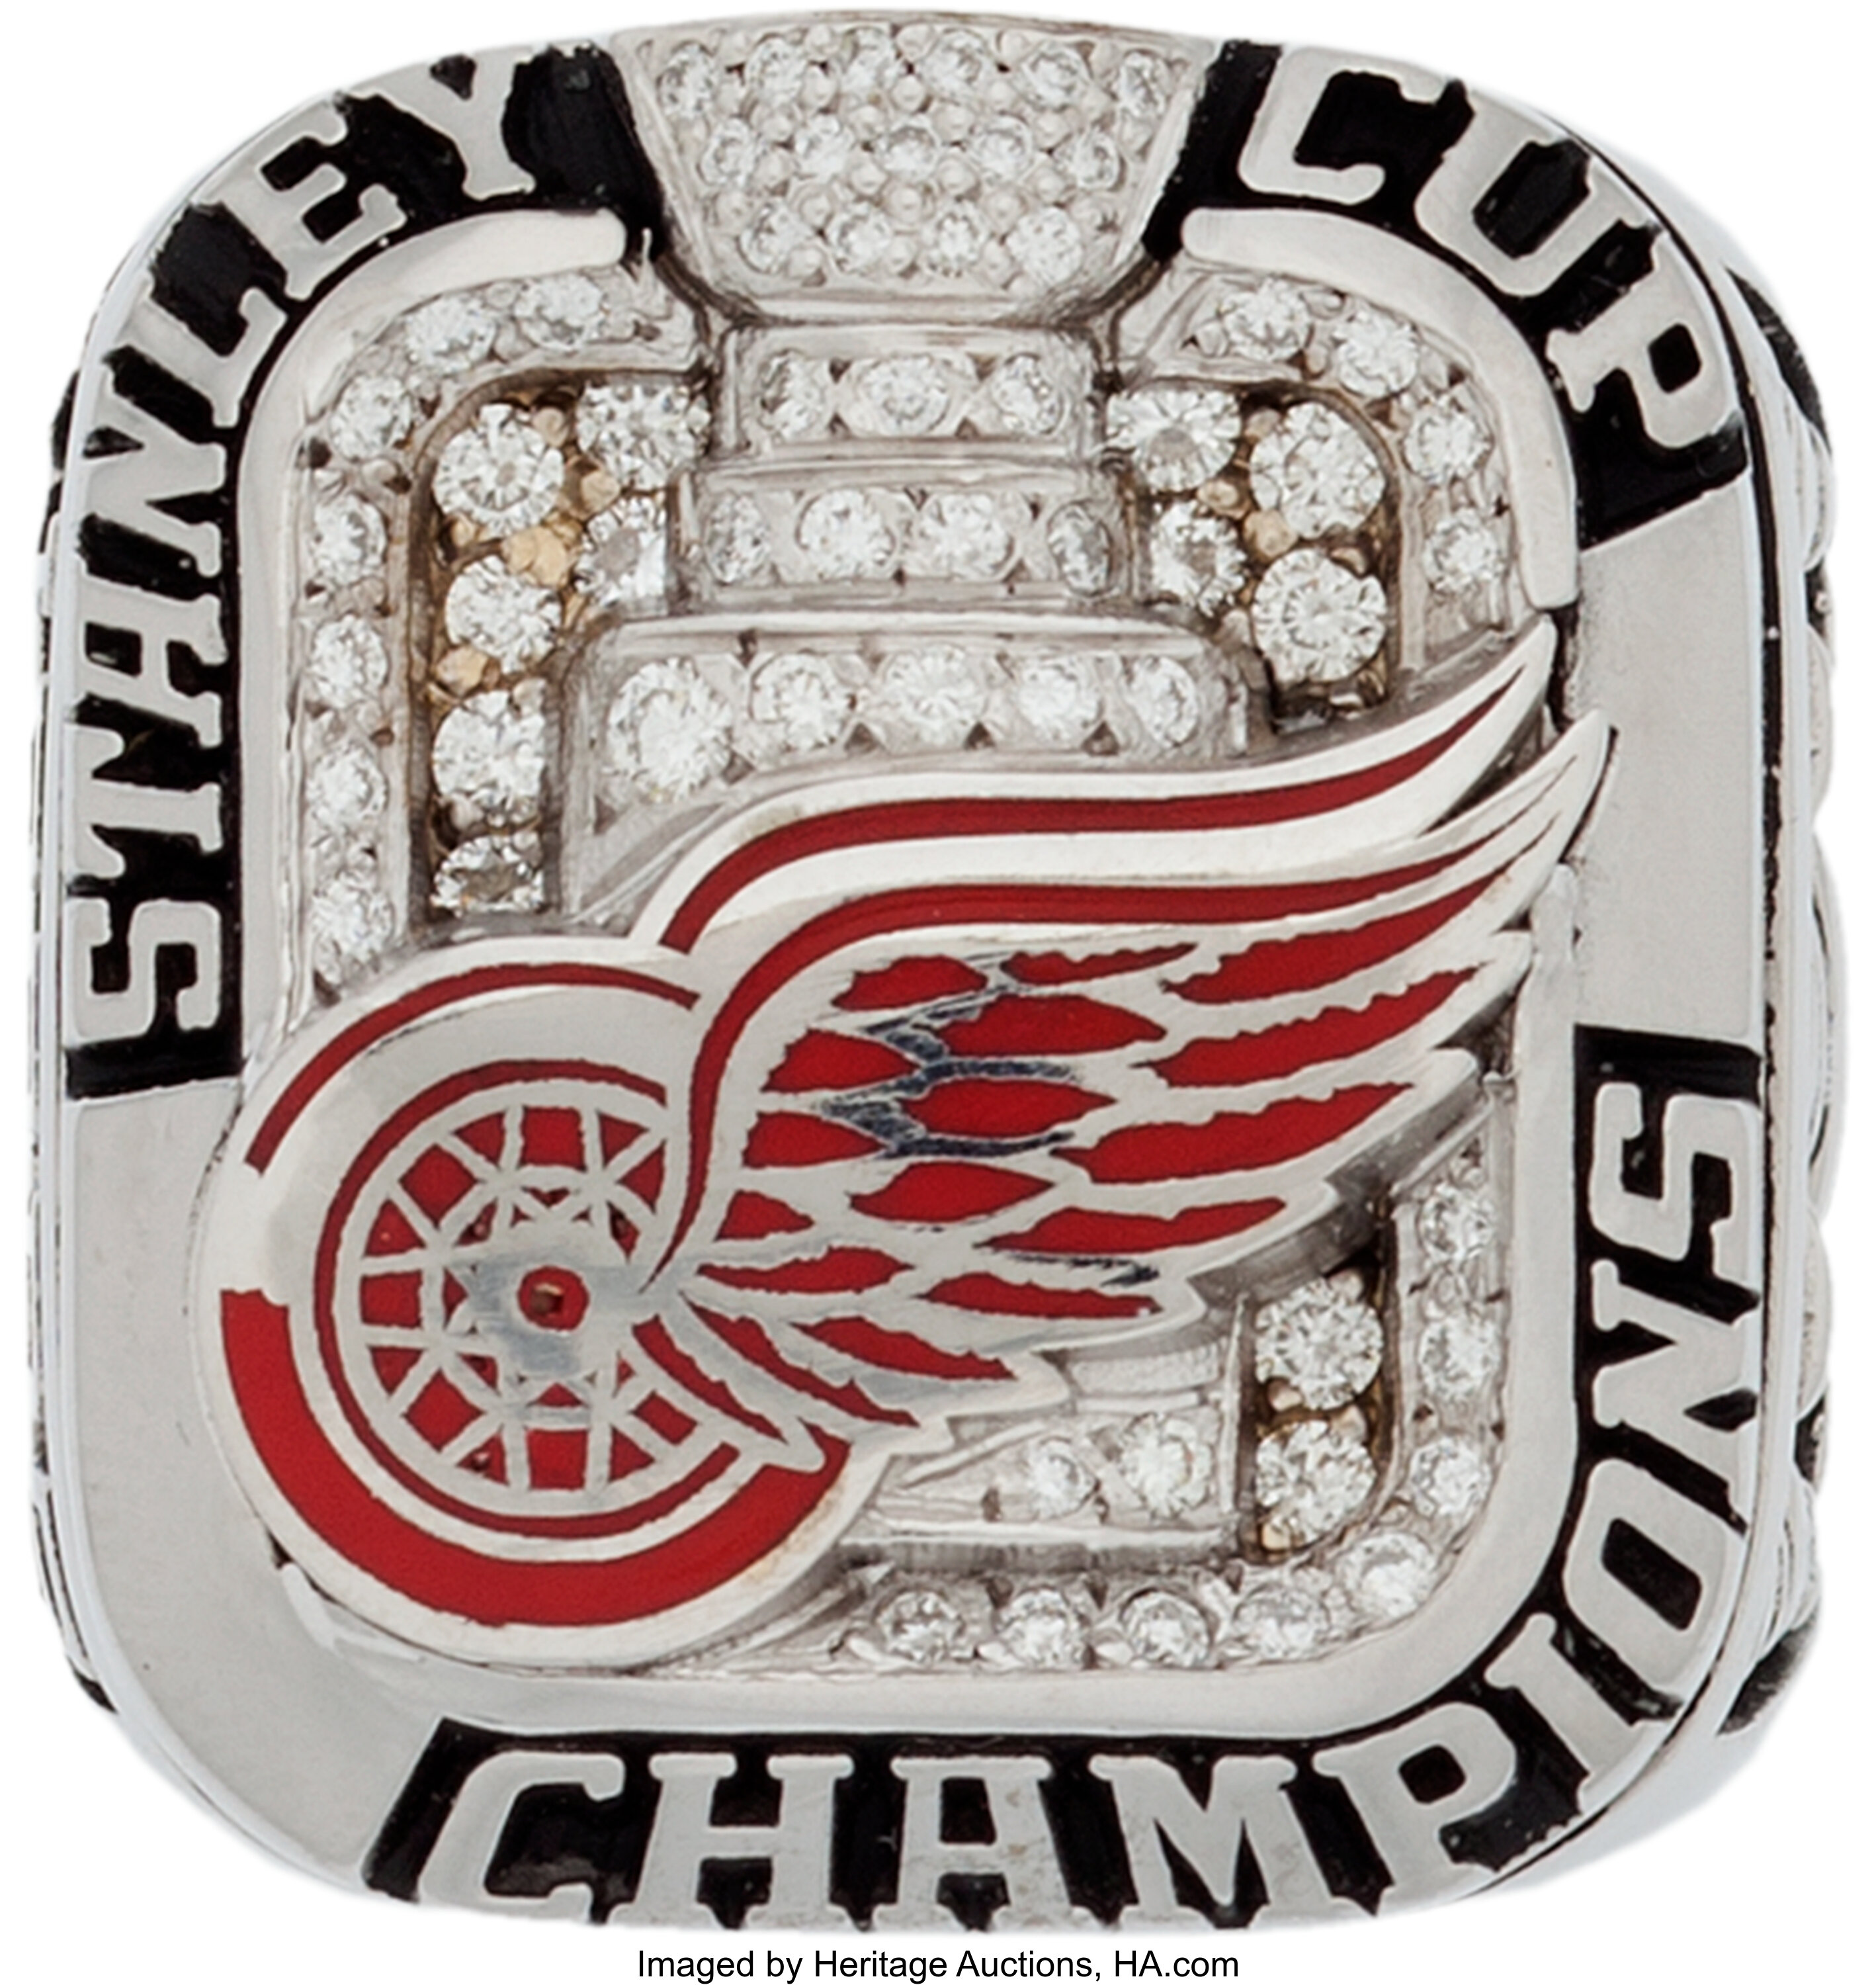 Detroit Red Wings 2007-08 Stanley Cup Champions by Detroit Red Wings - Issuu